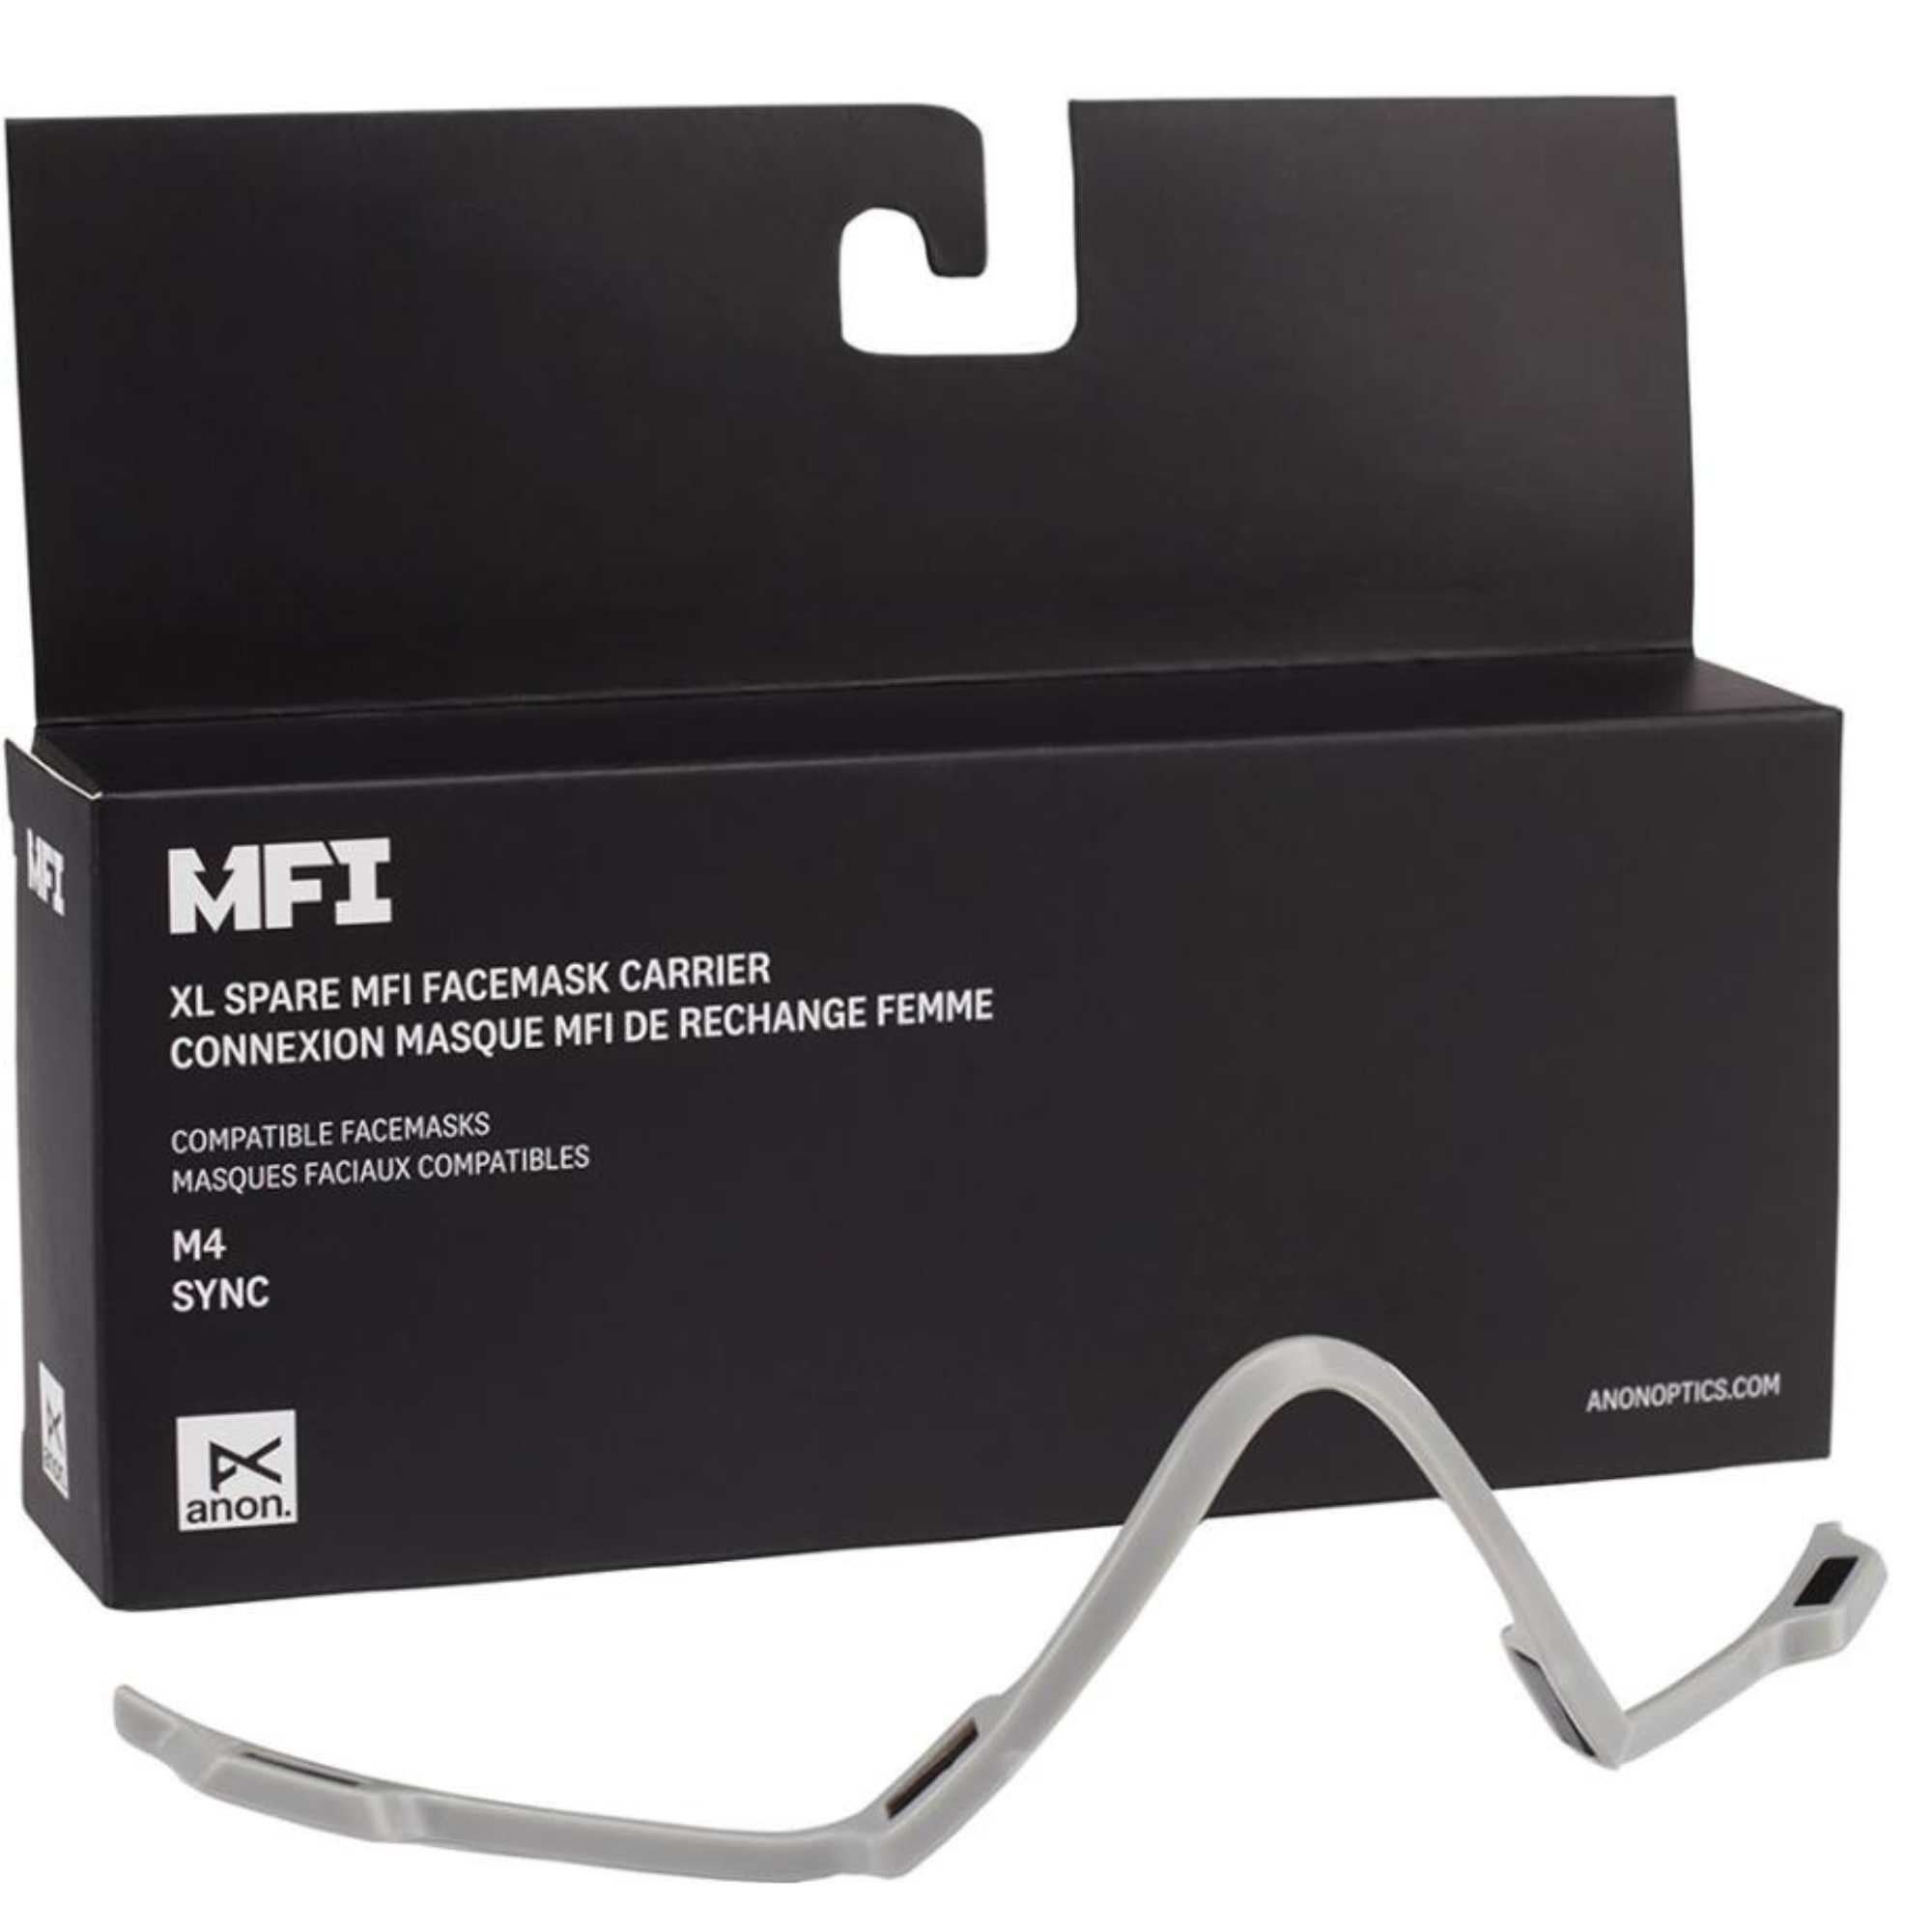 Anon XL Spare MFI Facemask Carrier - Gray